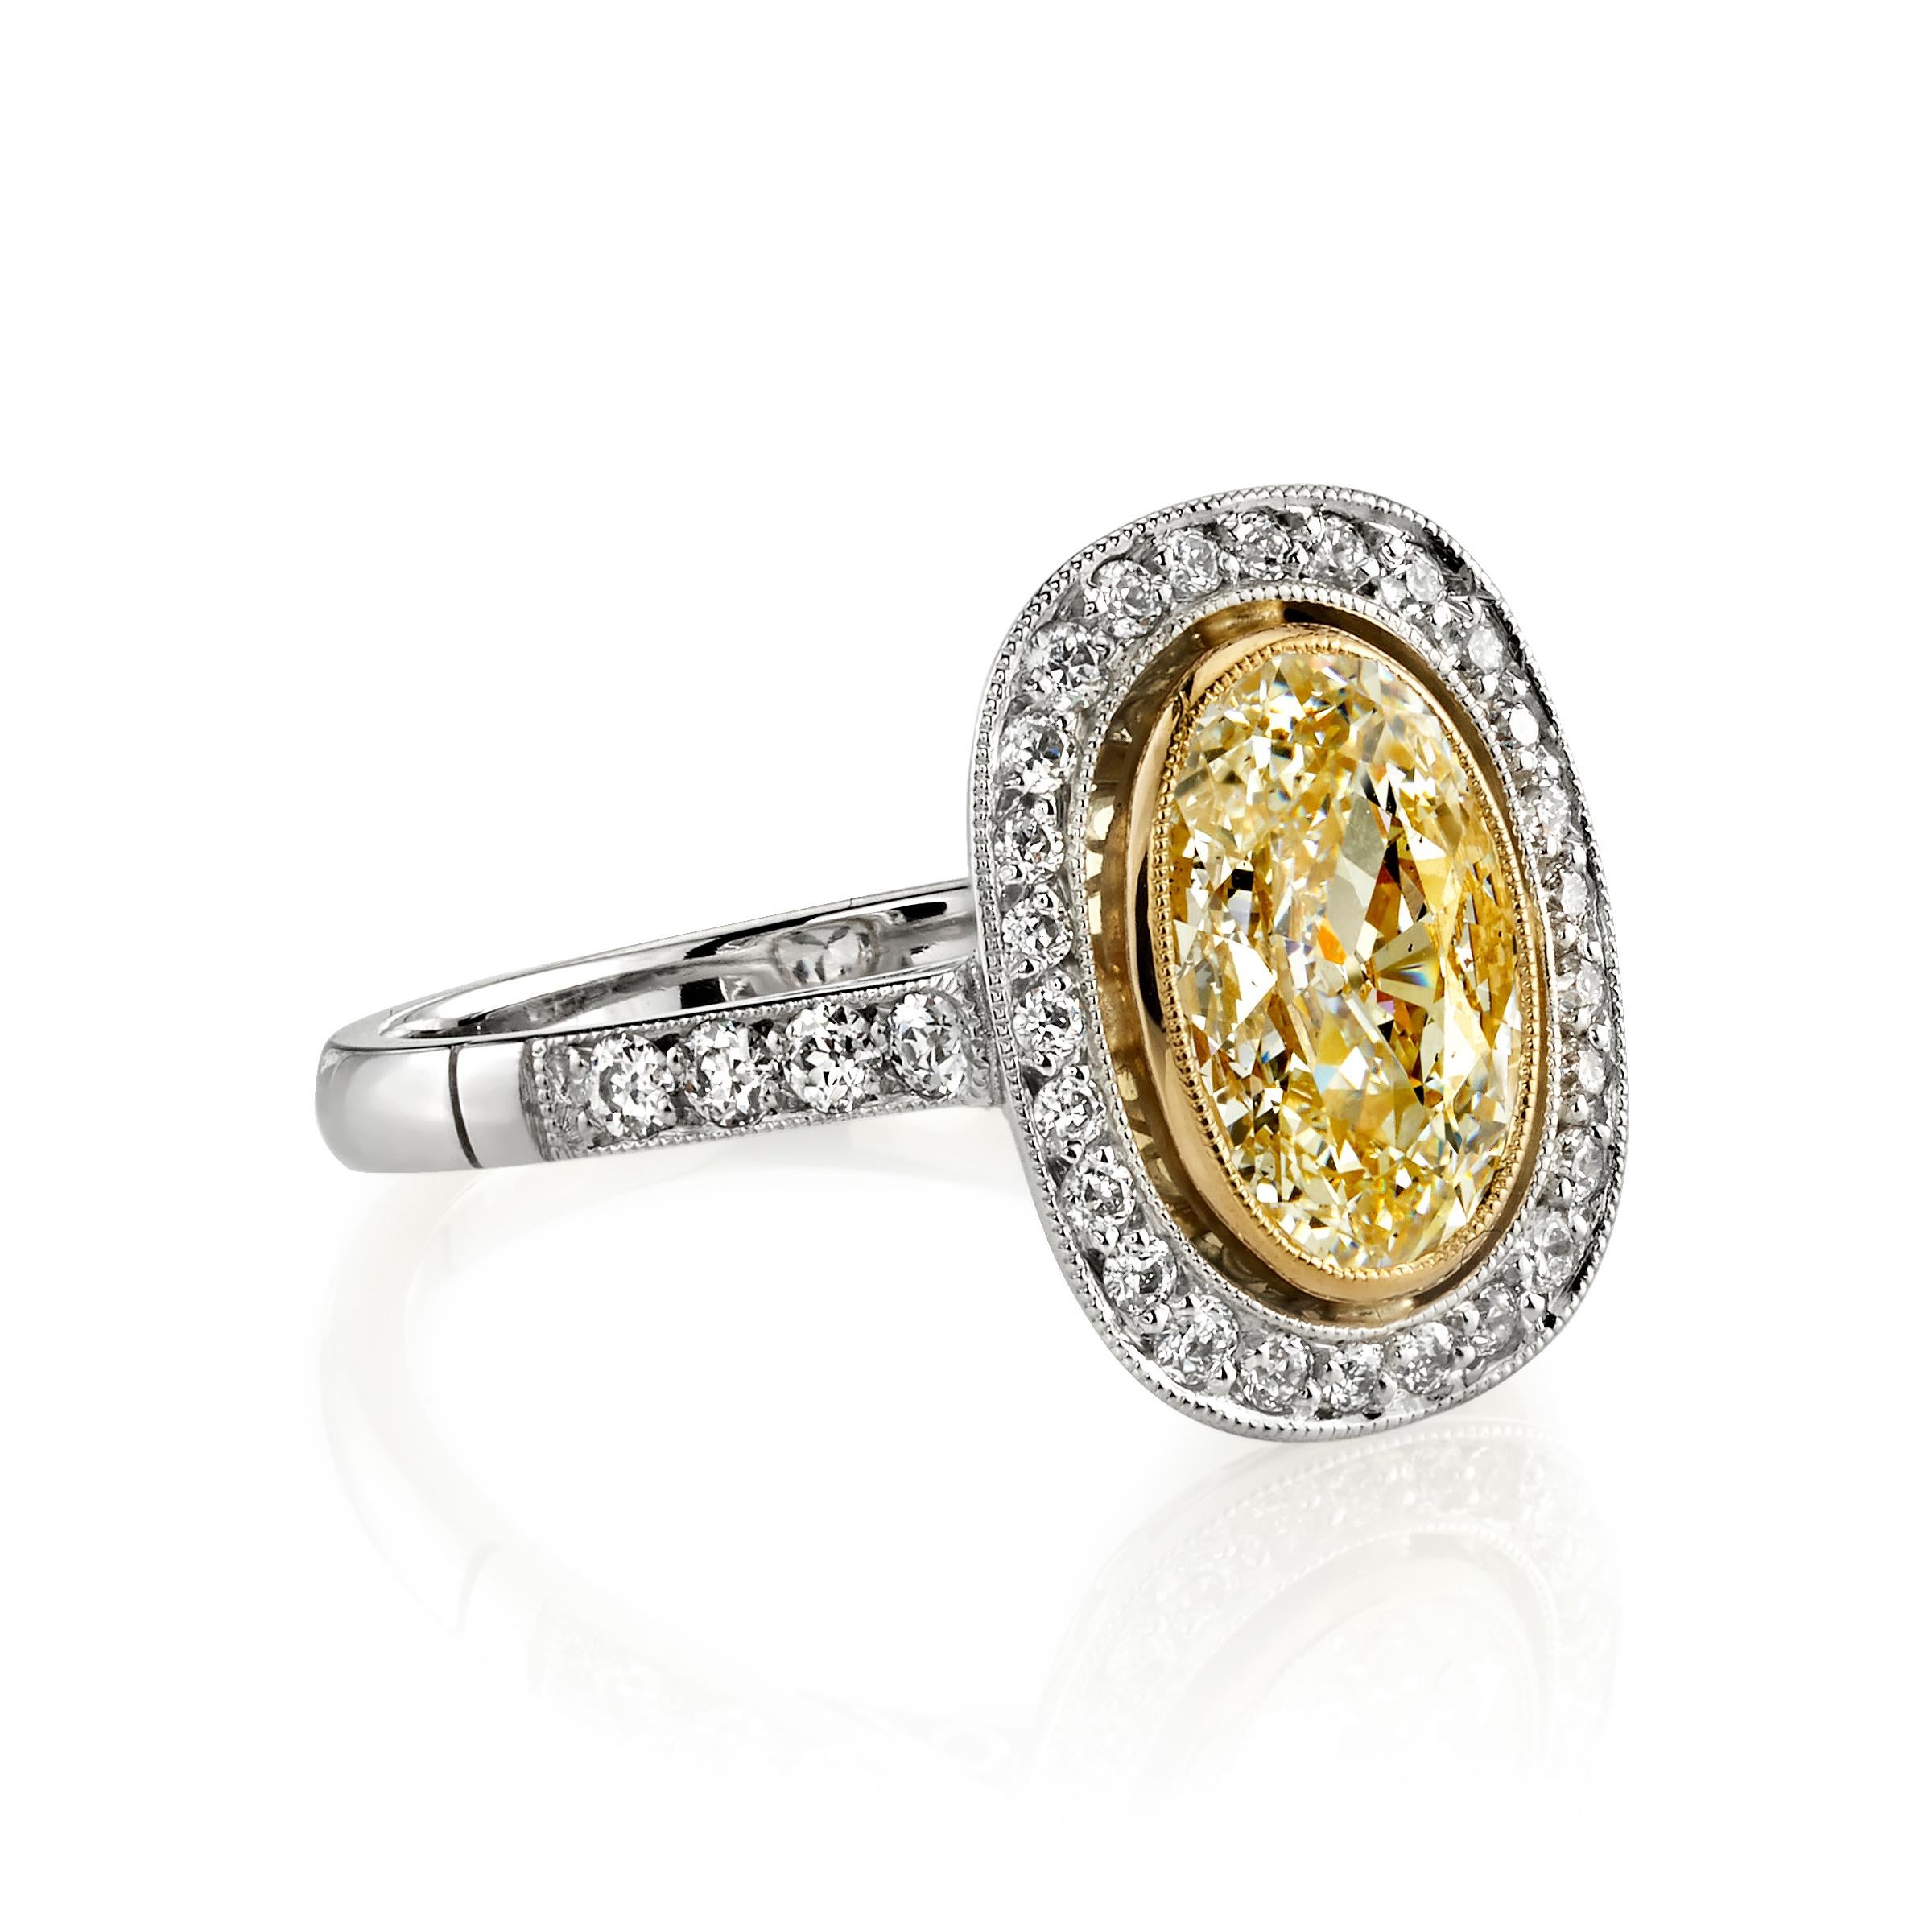 1.34ct H/VS2 GIA certified Oval cut diamond with 0.33ctw accent diamonds set in a handcrafted platinum and 18K yellow gold mounting. Ring is currently a size 6 and can be sized to fit. 